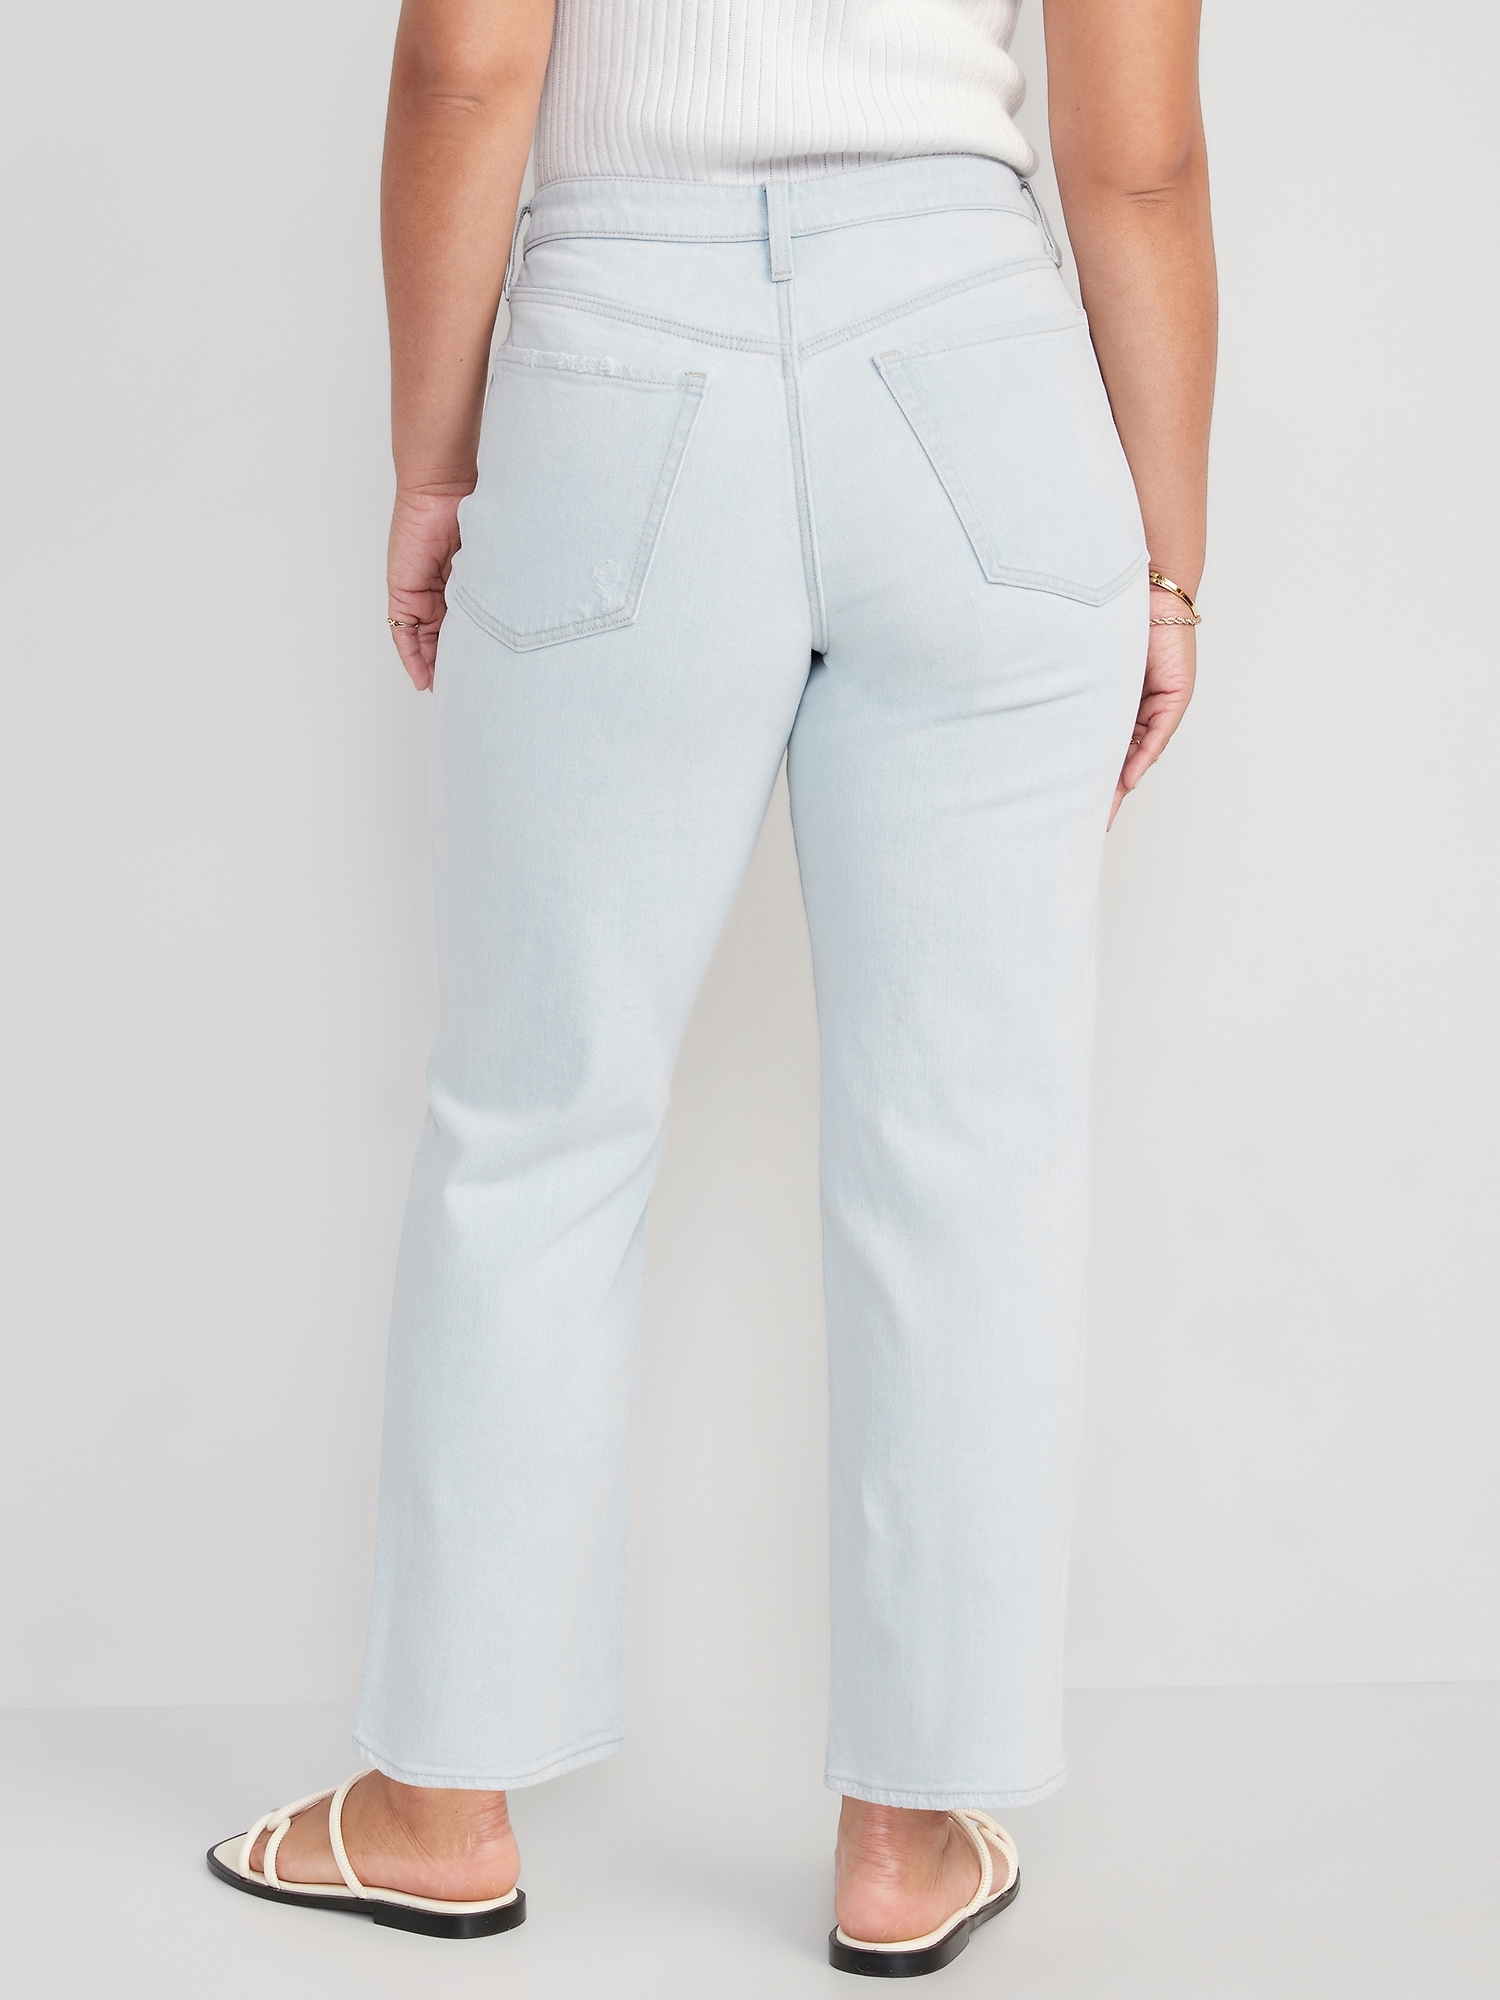 High-Waisted OG Loose Ripped Jeans for Women | Old Navy